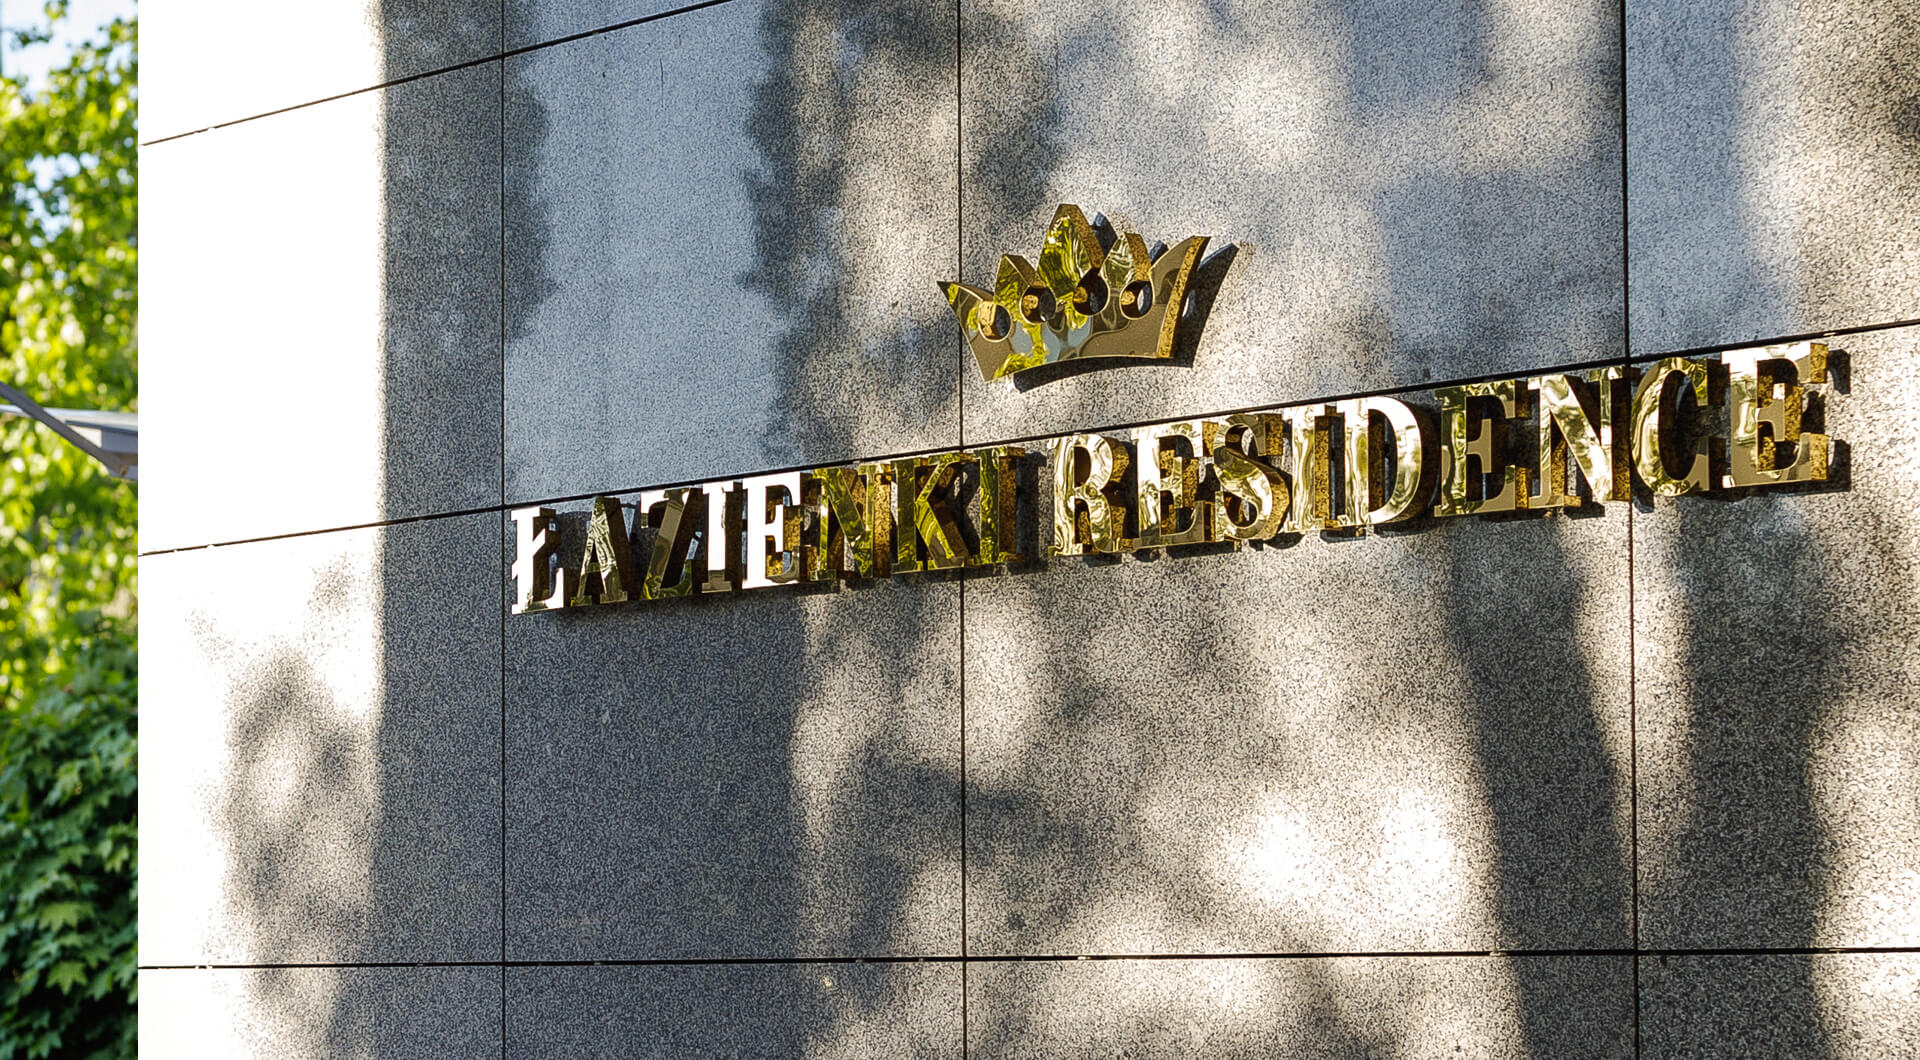 Baths Residence - Bathroom Residence inscription made of stainless steel in gold color, with a crown in the logo.